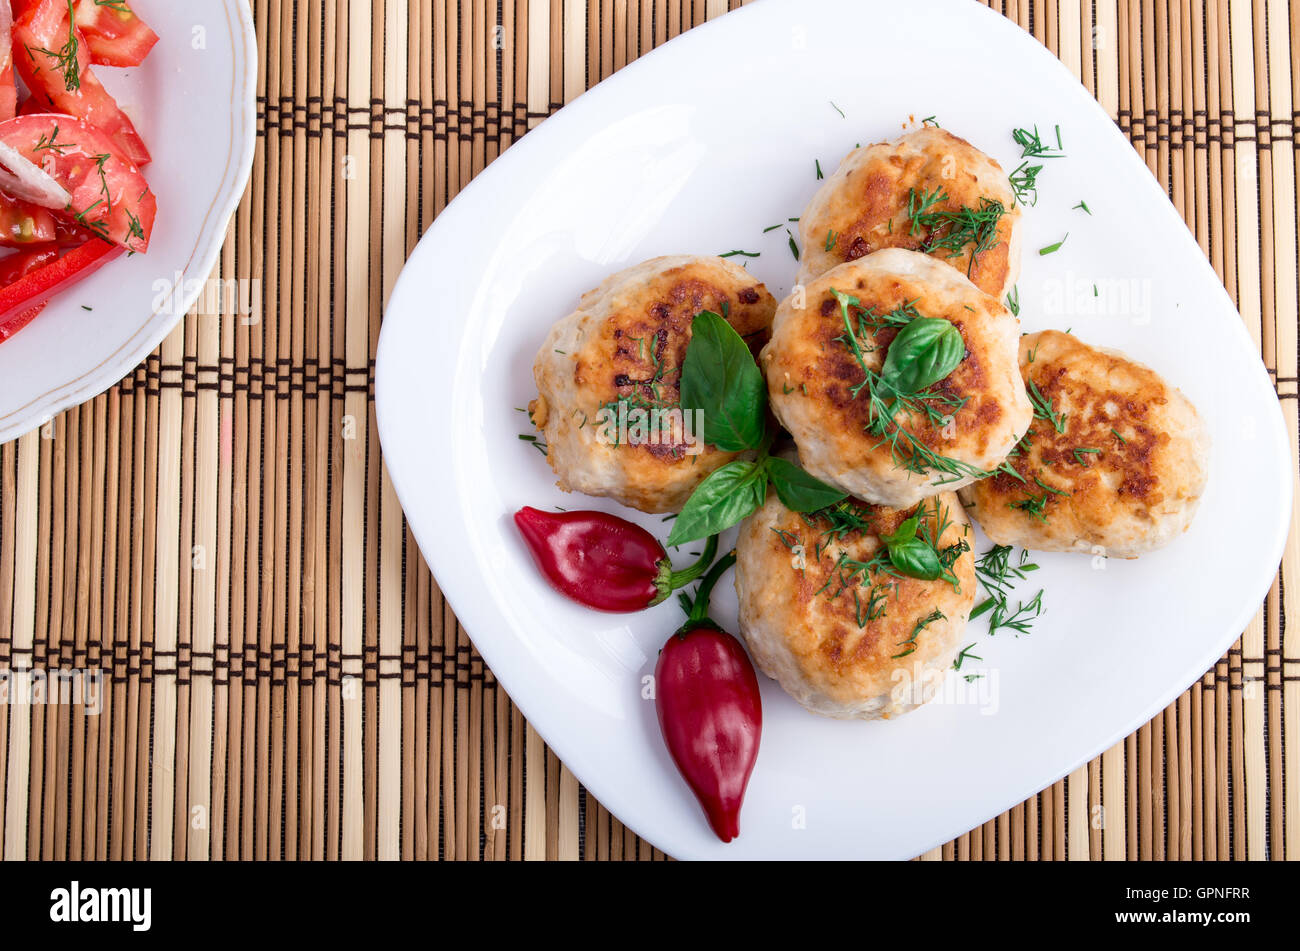 Top view on food made from natural ingredients - chicken meatballs of minced meat and a salad of raw tomatoes on a striped backg Stock Photo